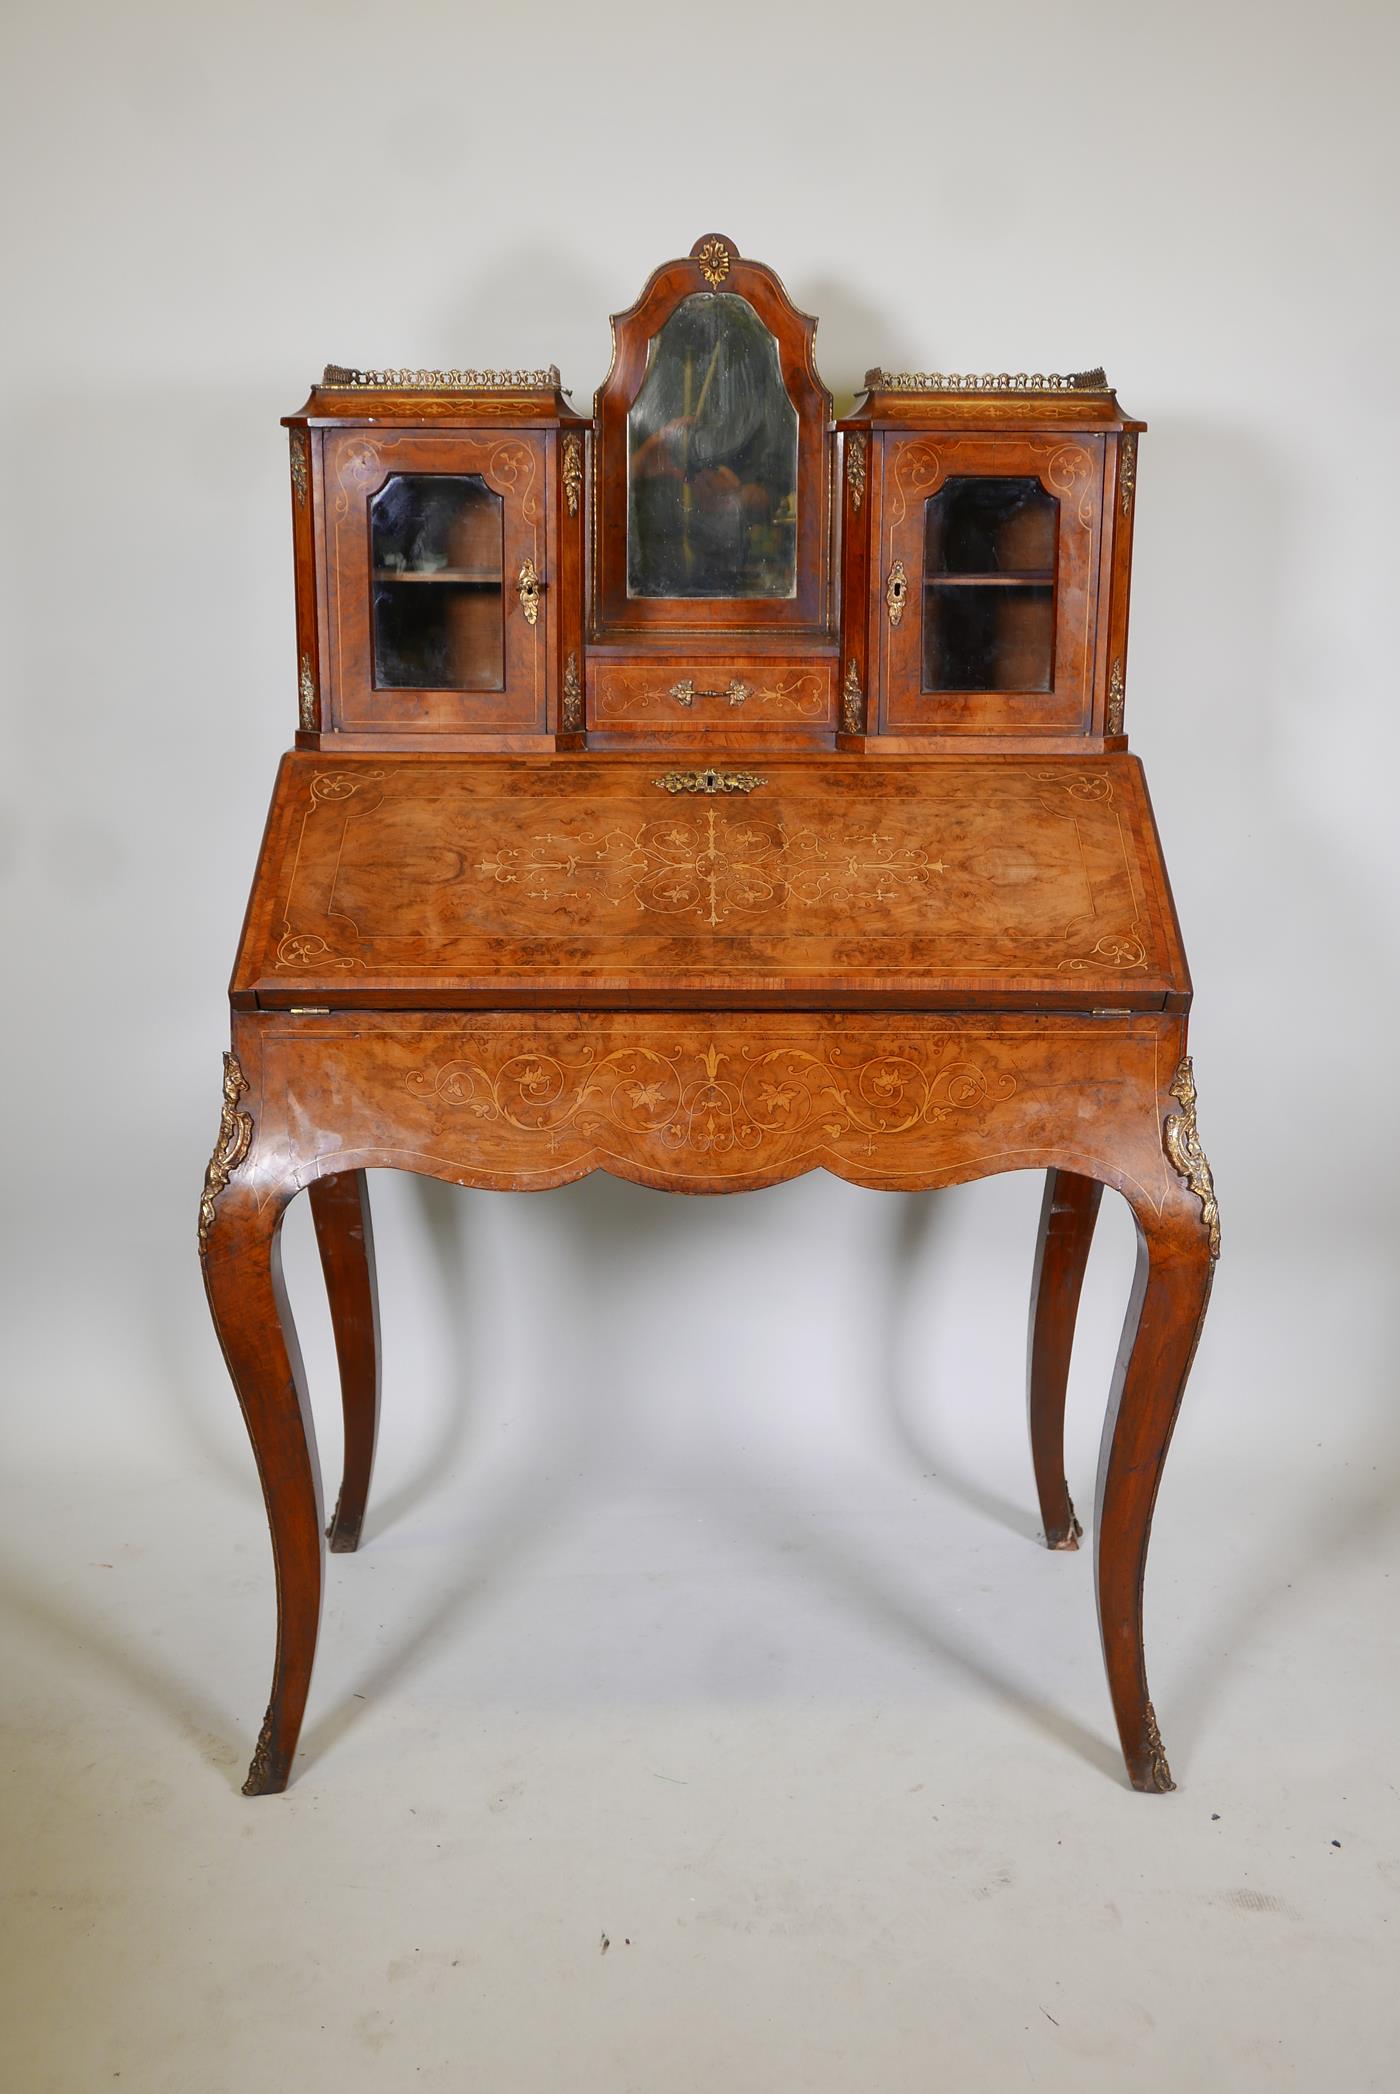 A Victorian inlaid, figured and burr walnut bonne-heure-de jour, with a brass galleried top and